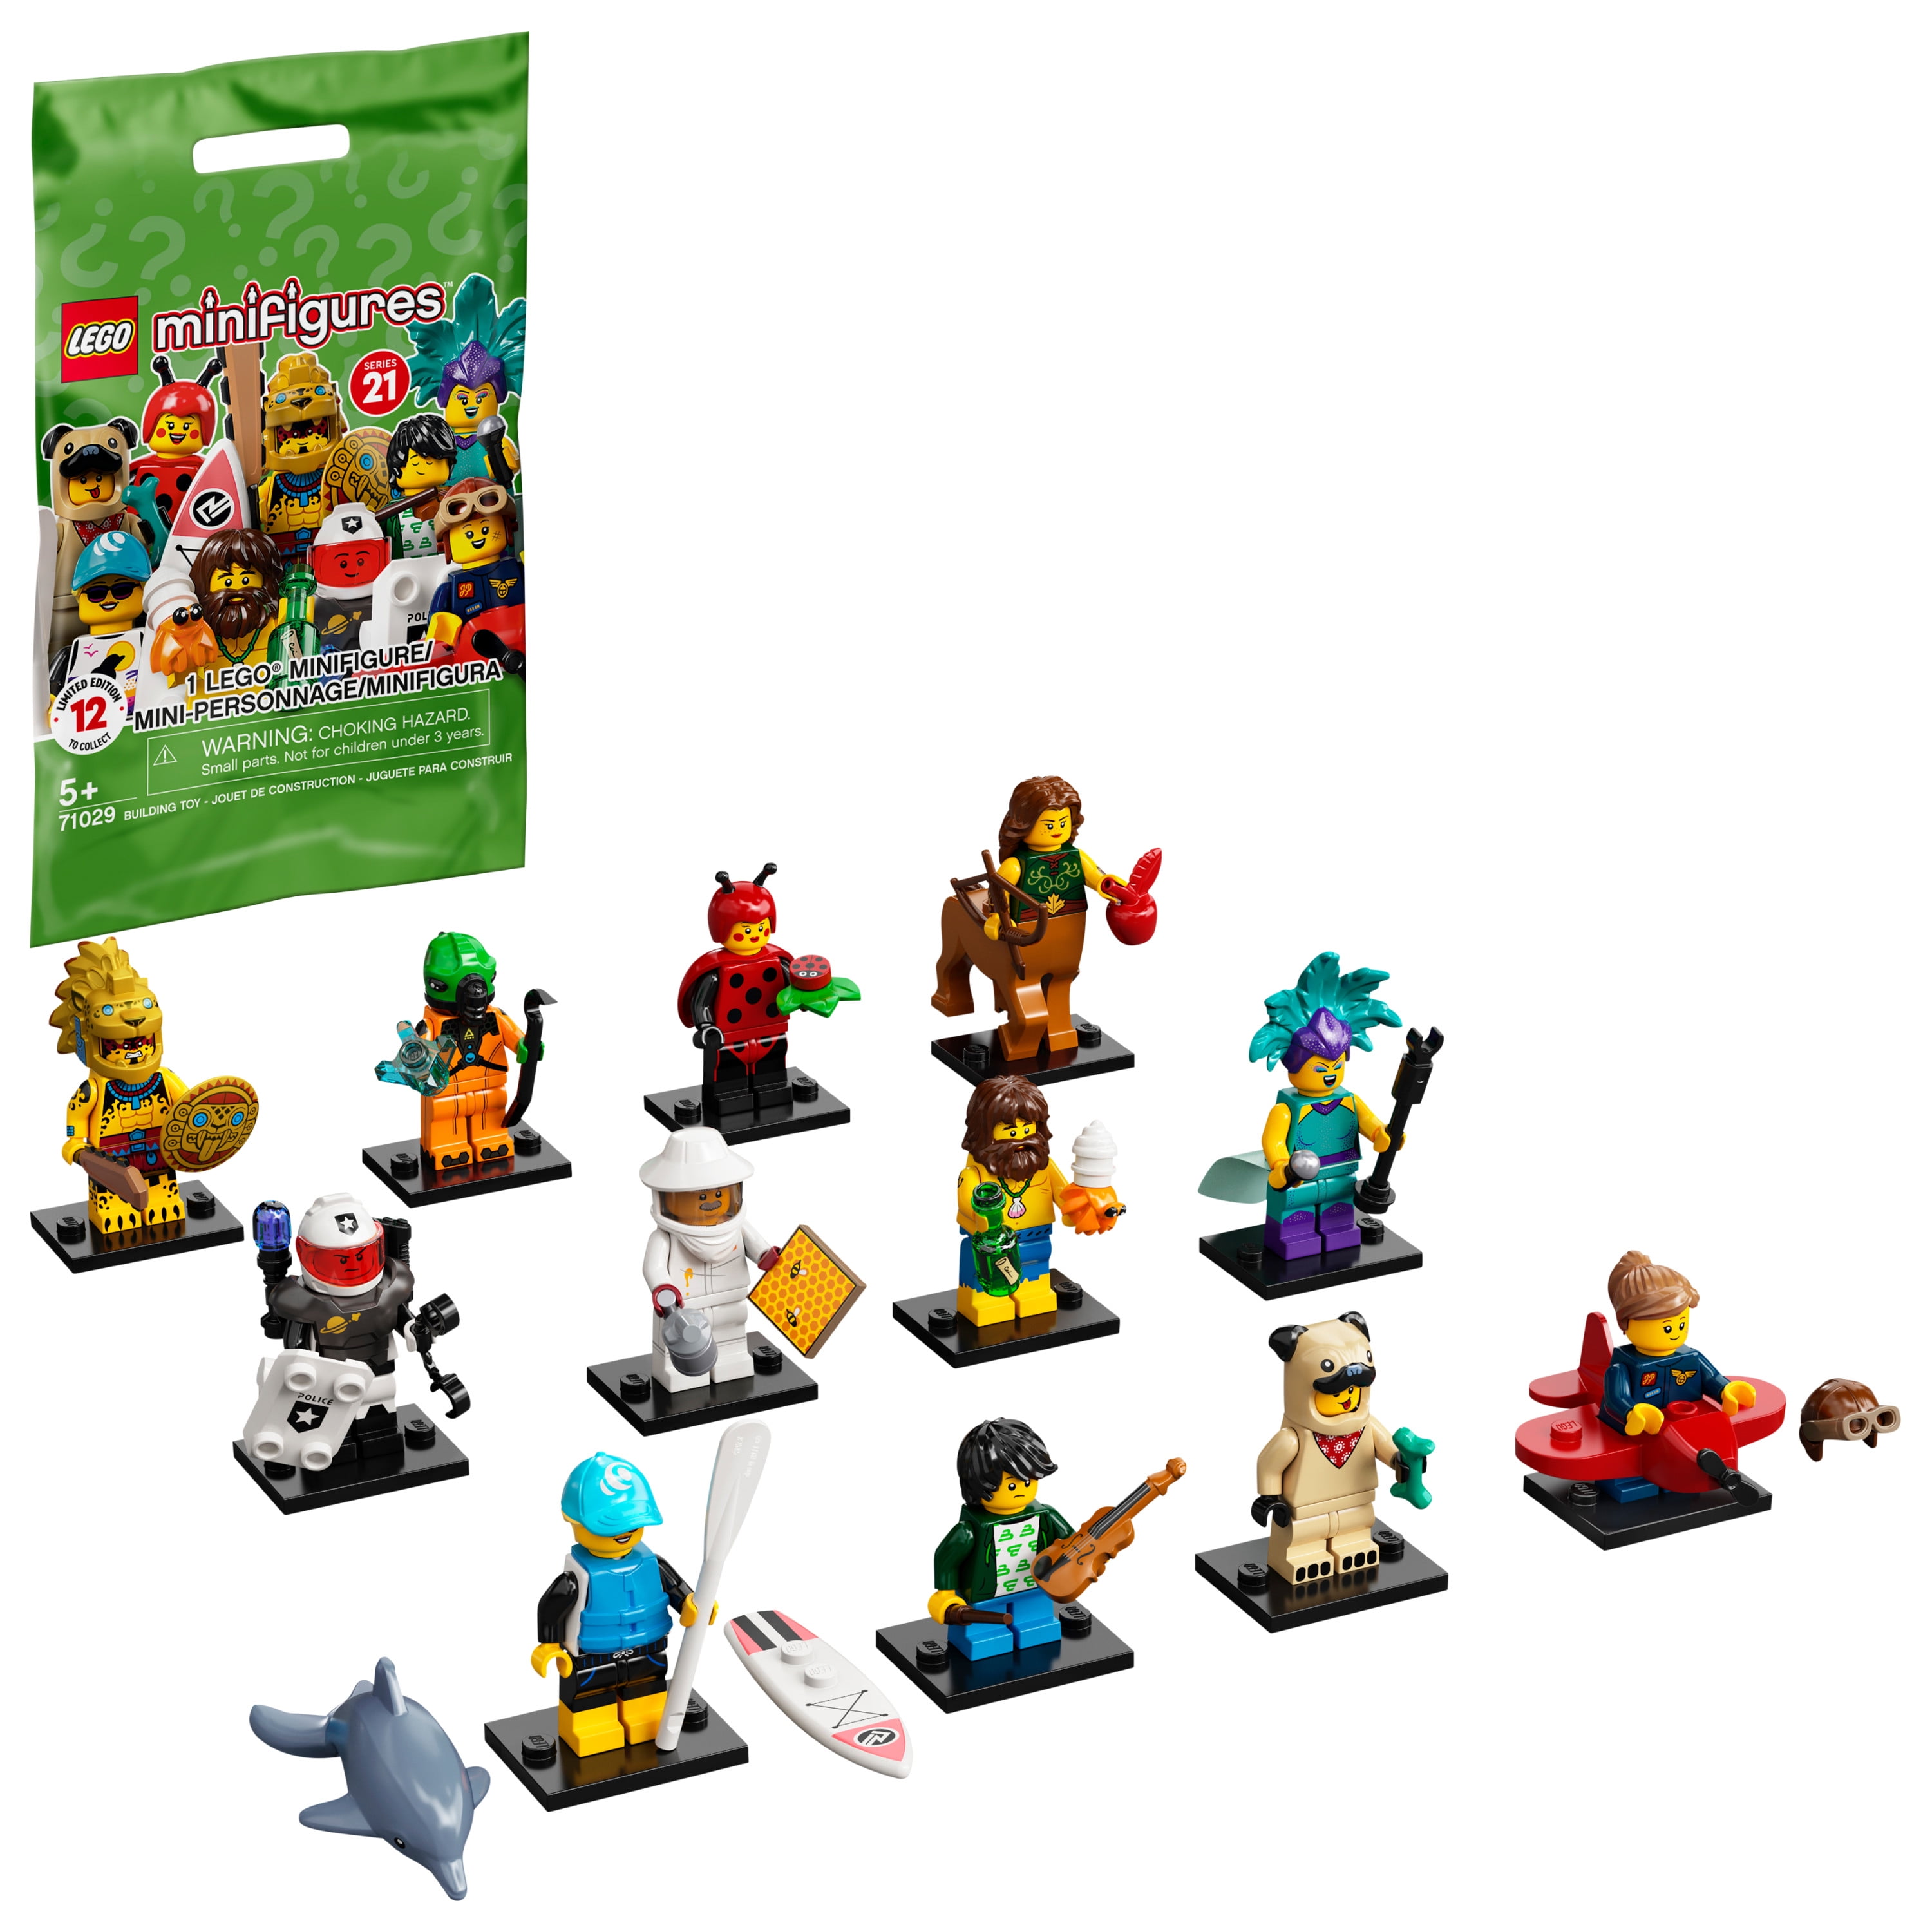 Packet only cut to ID LEGO Minifigures 71029 Series 21 CHOOSE YOUR FIGURE 